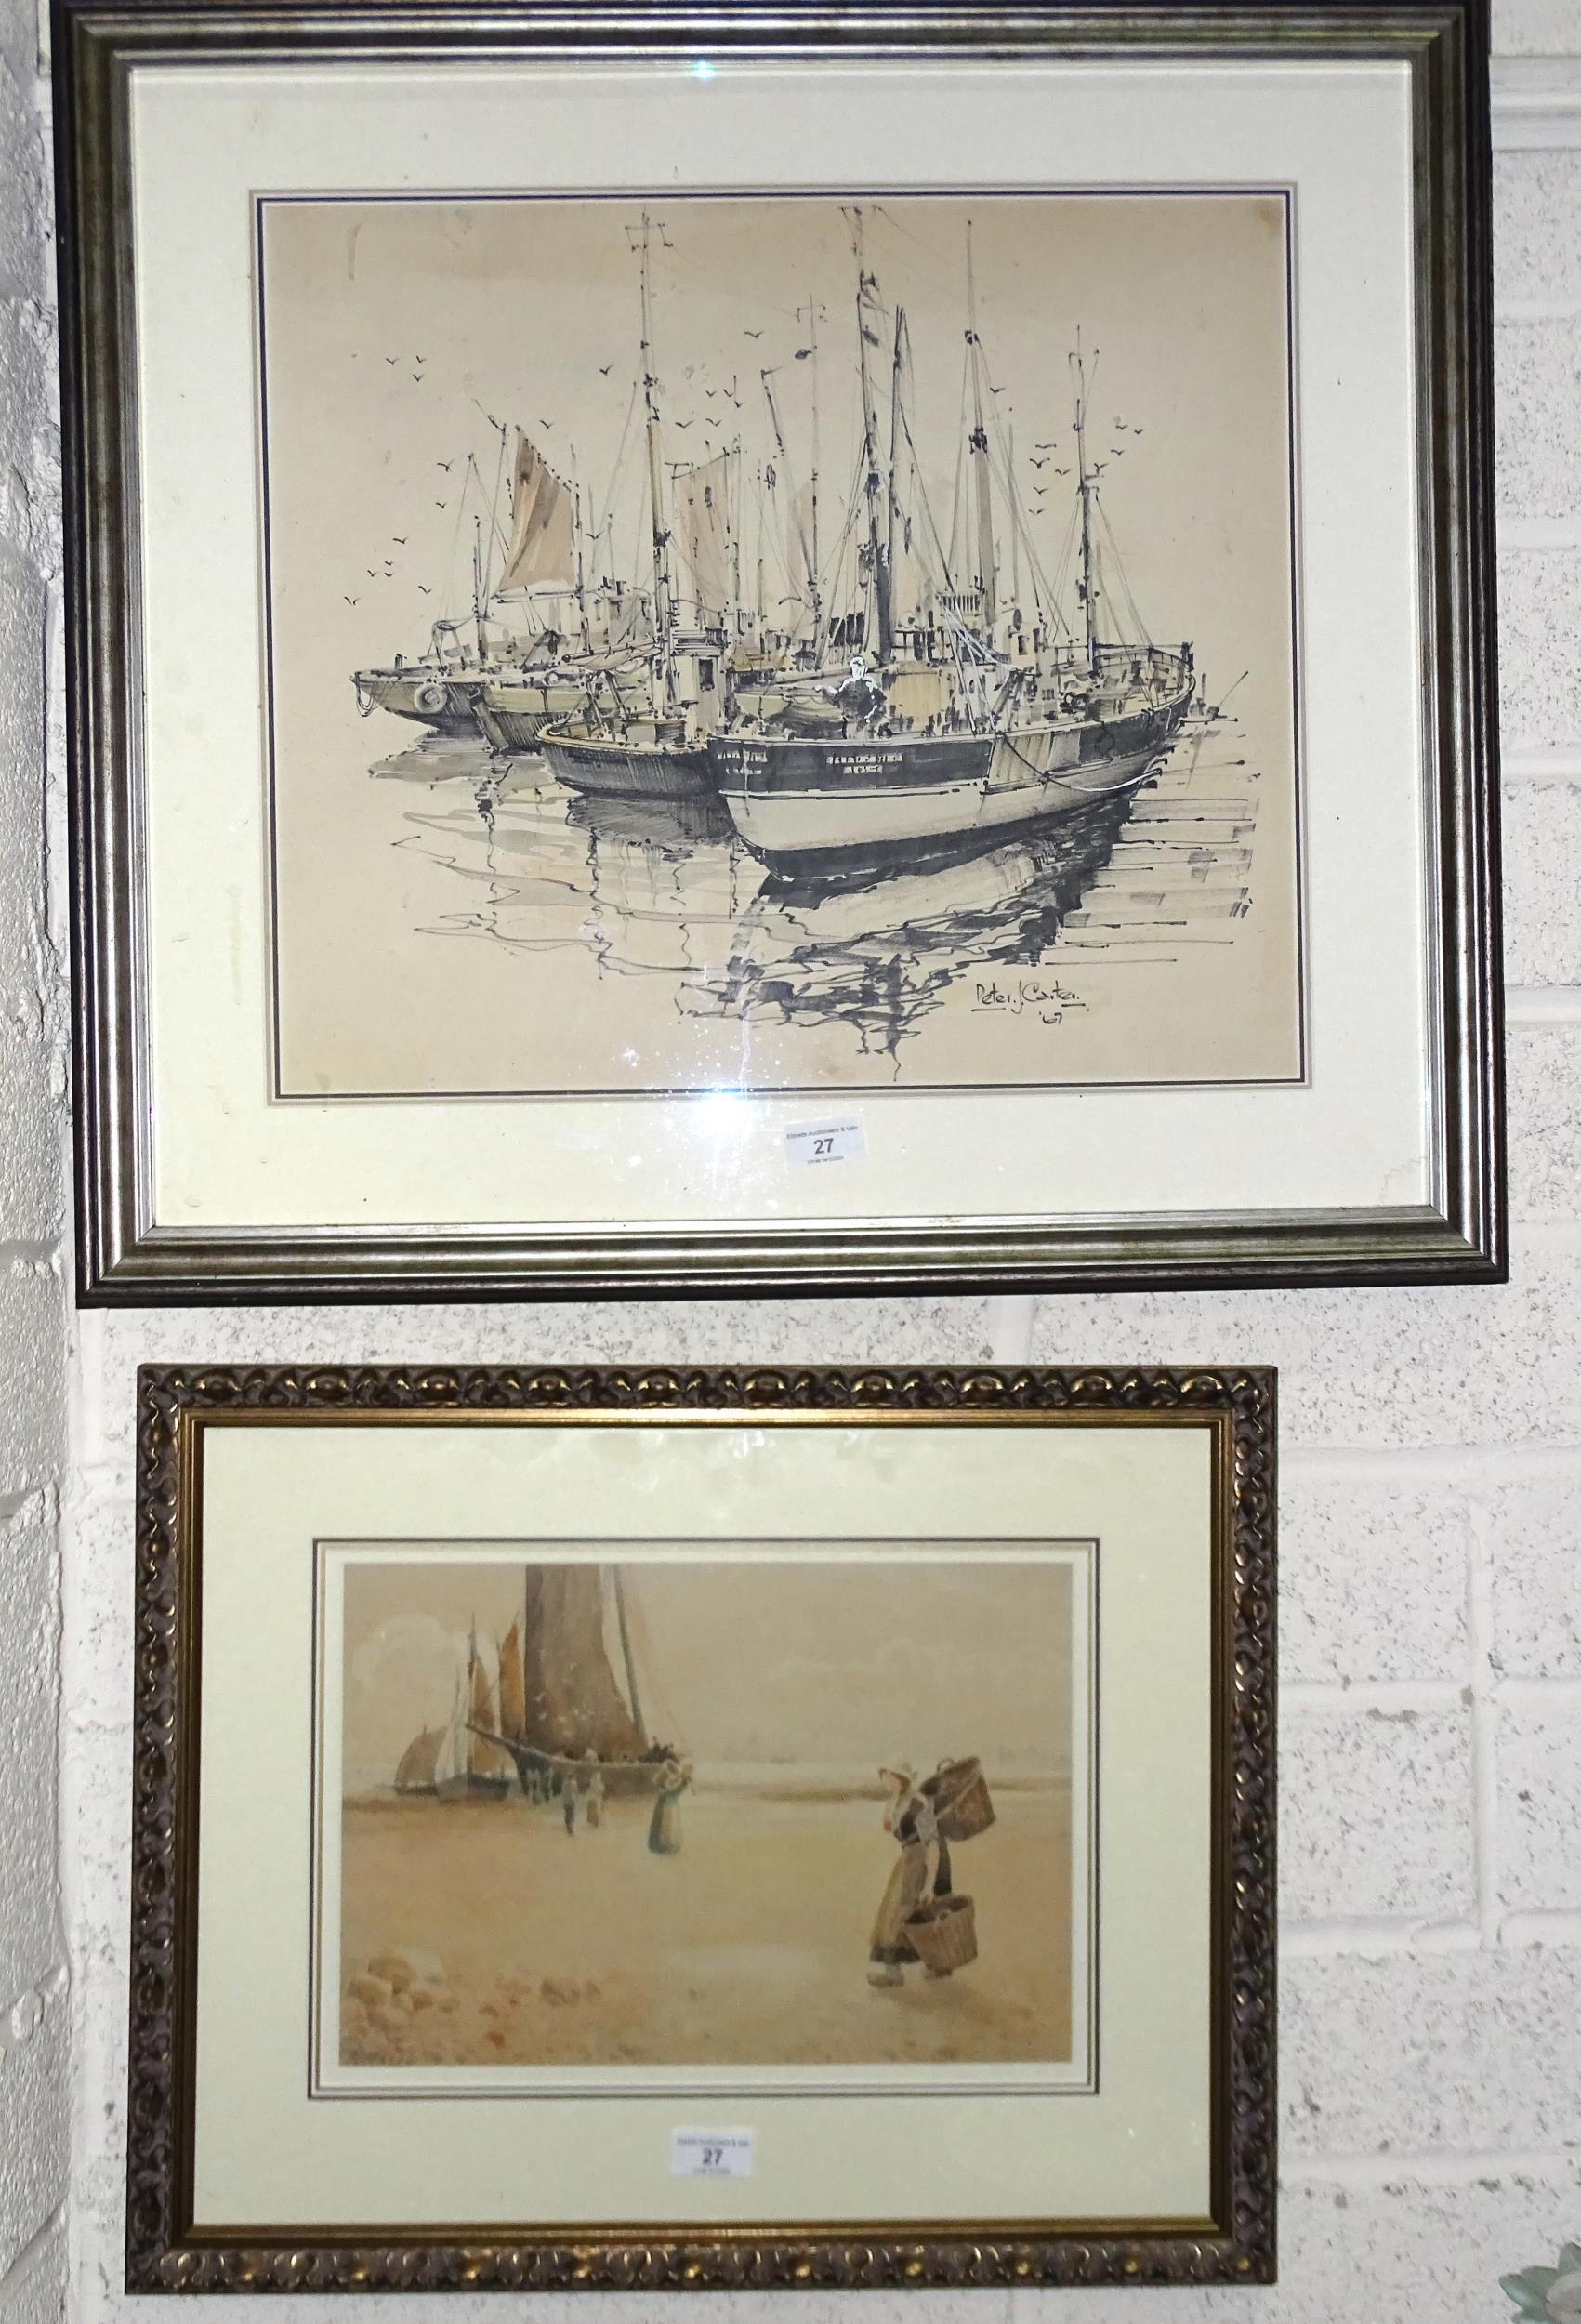 Peter J Carter, 'Fishing boats moored beside quay', ink and watercolour heightened in white,